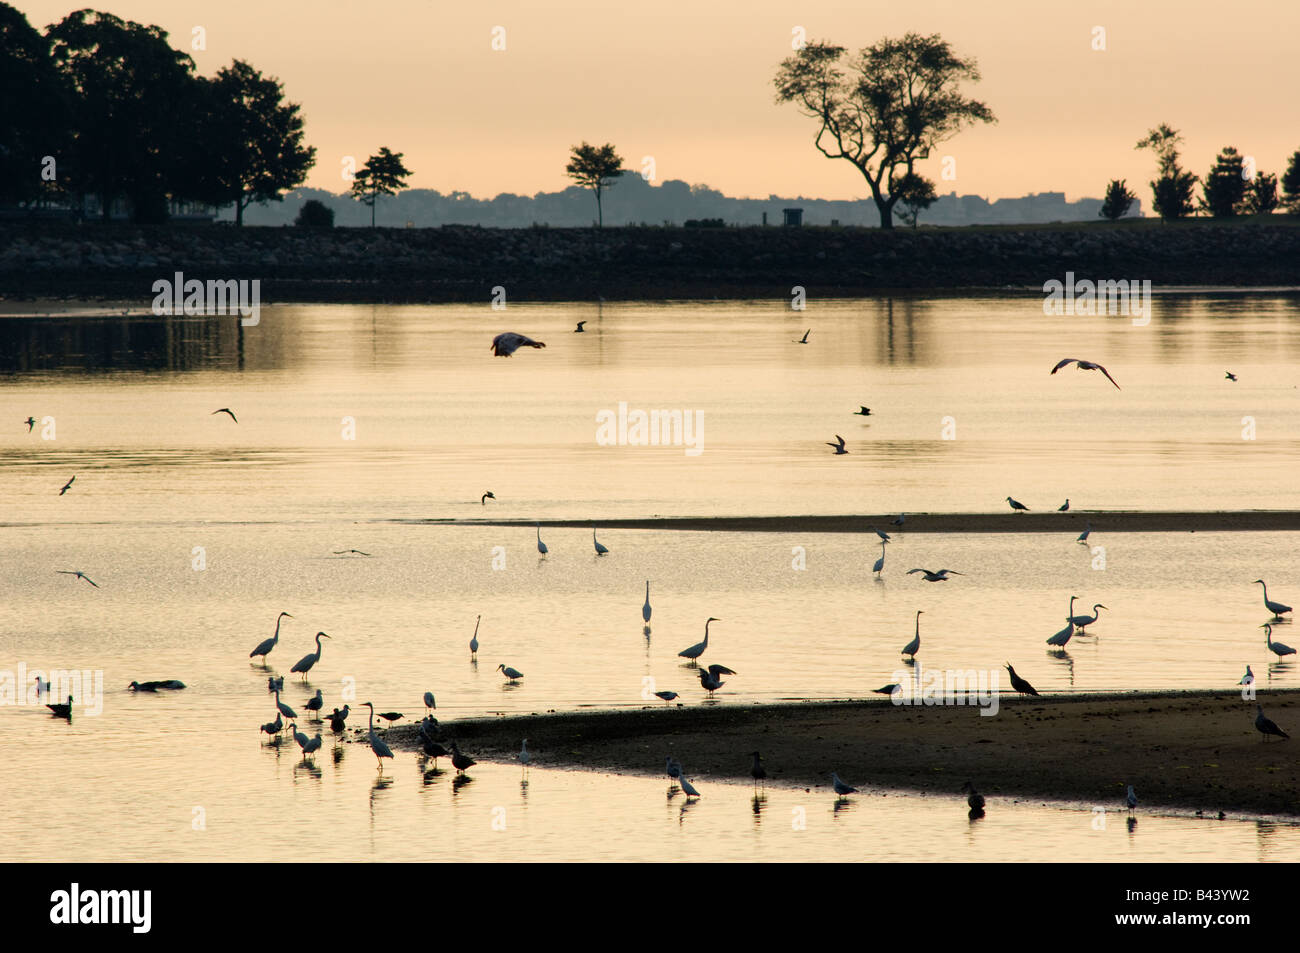 A calm silhouetted sunrise scene with water birds and trees at Compo Beach, Westport, Ct. Stock Photo